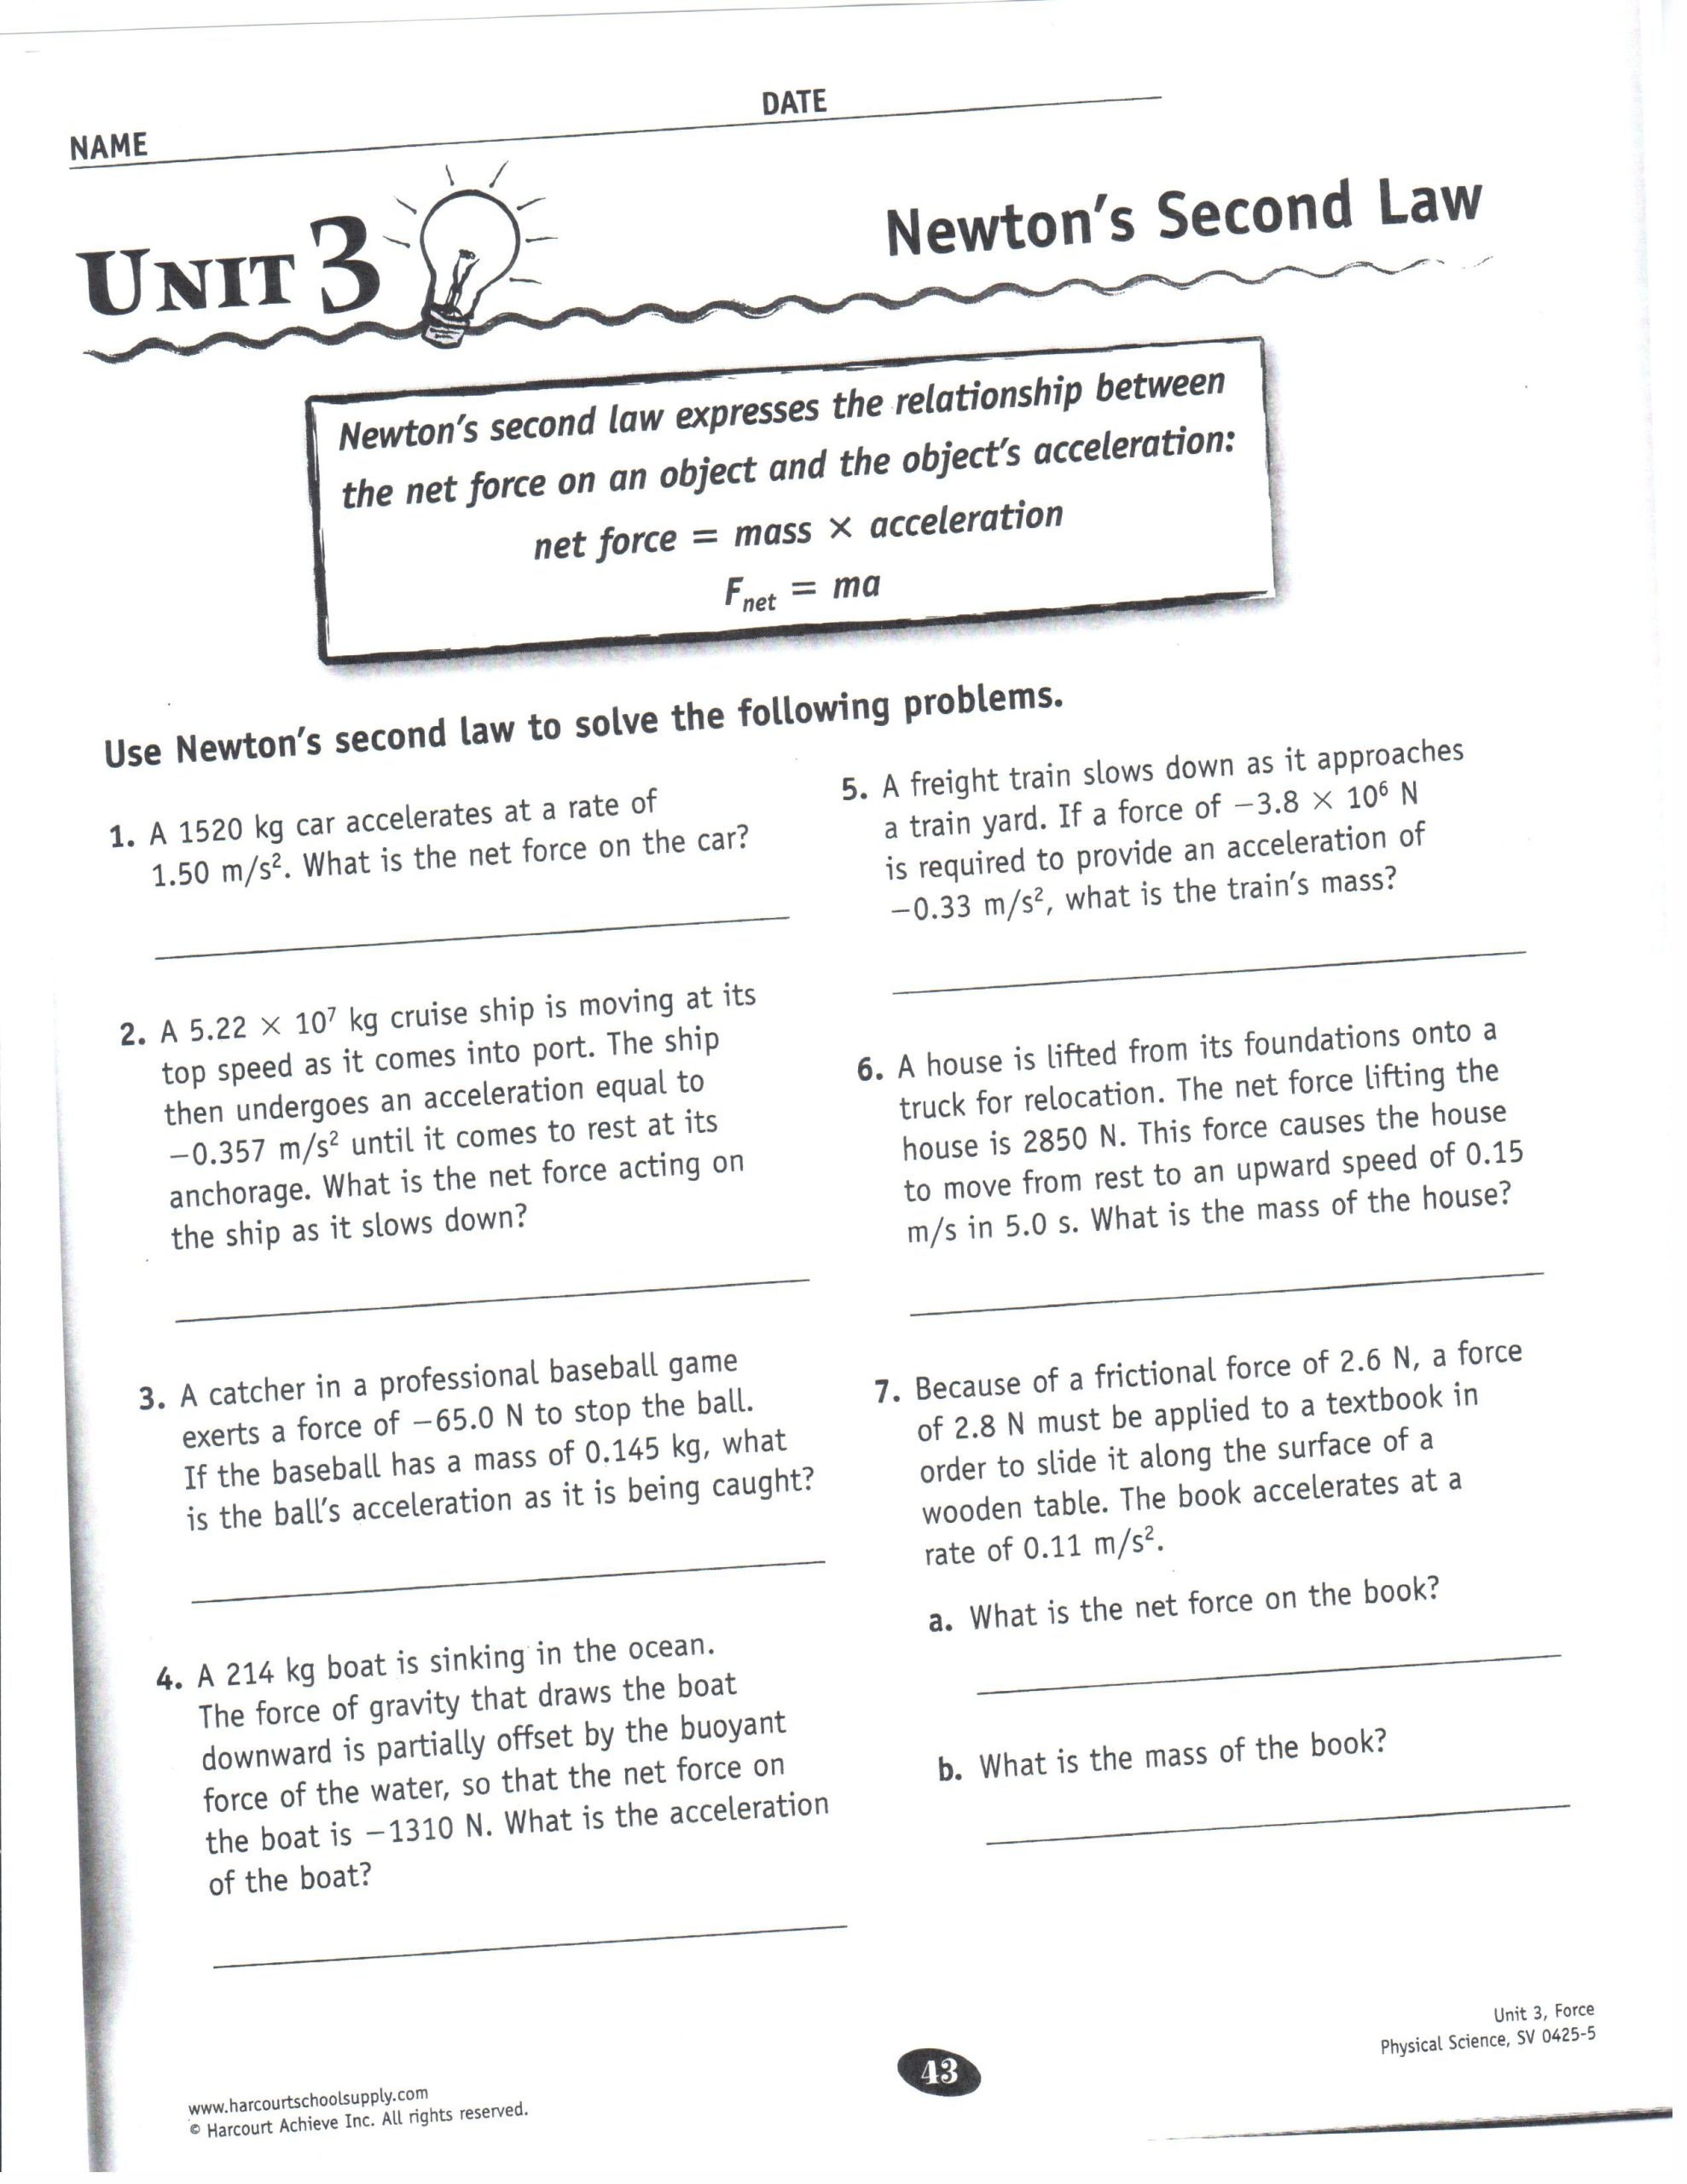 Newton's Second Law Of Motion Problems Worksheet Key